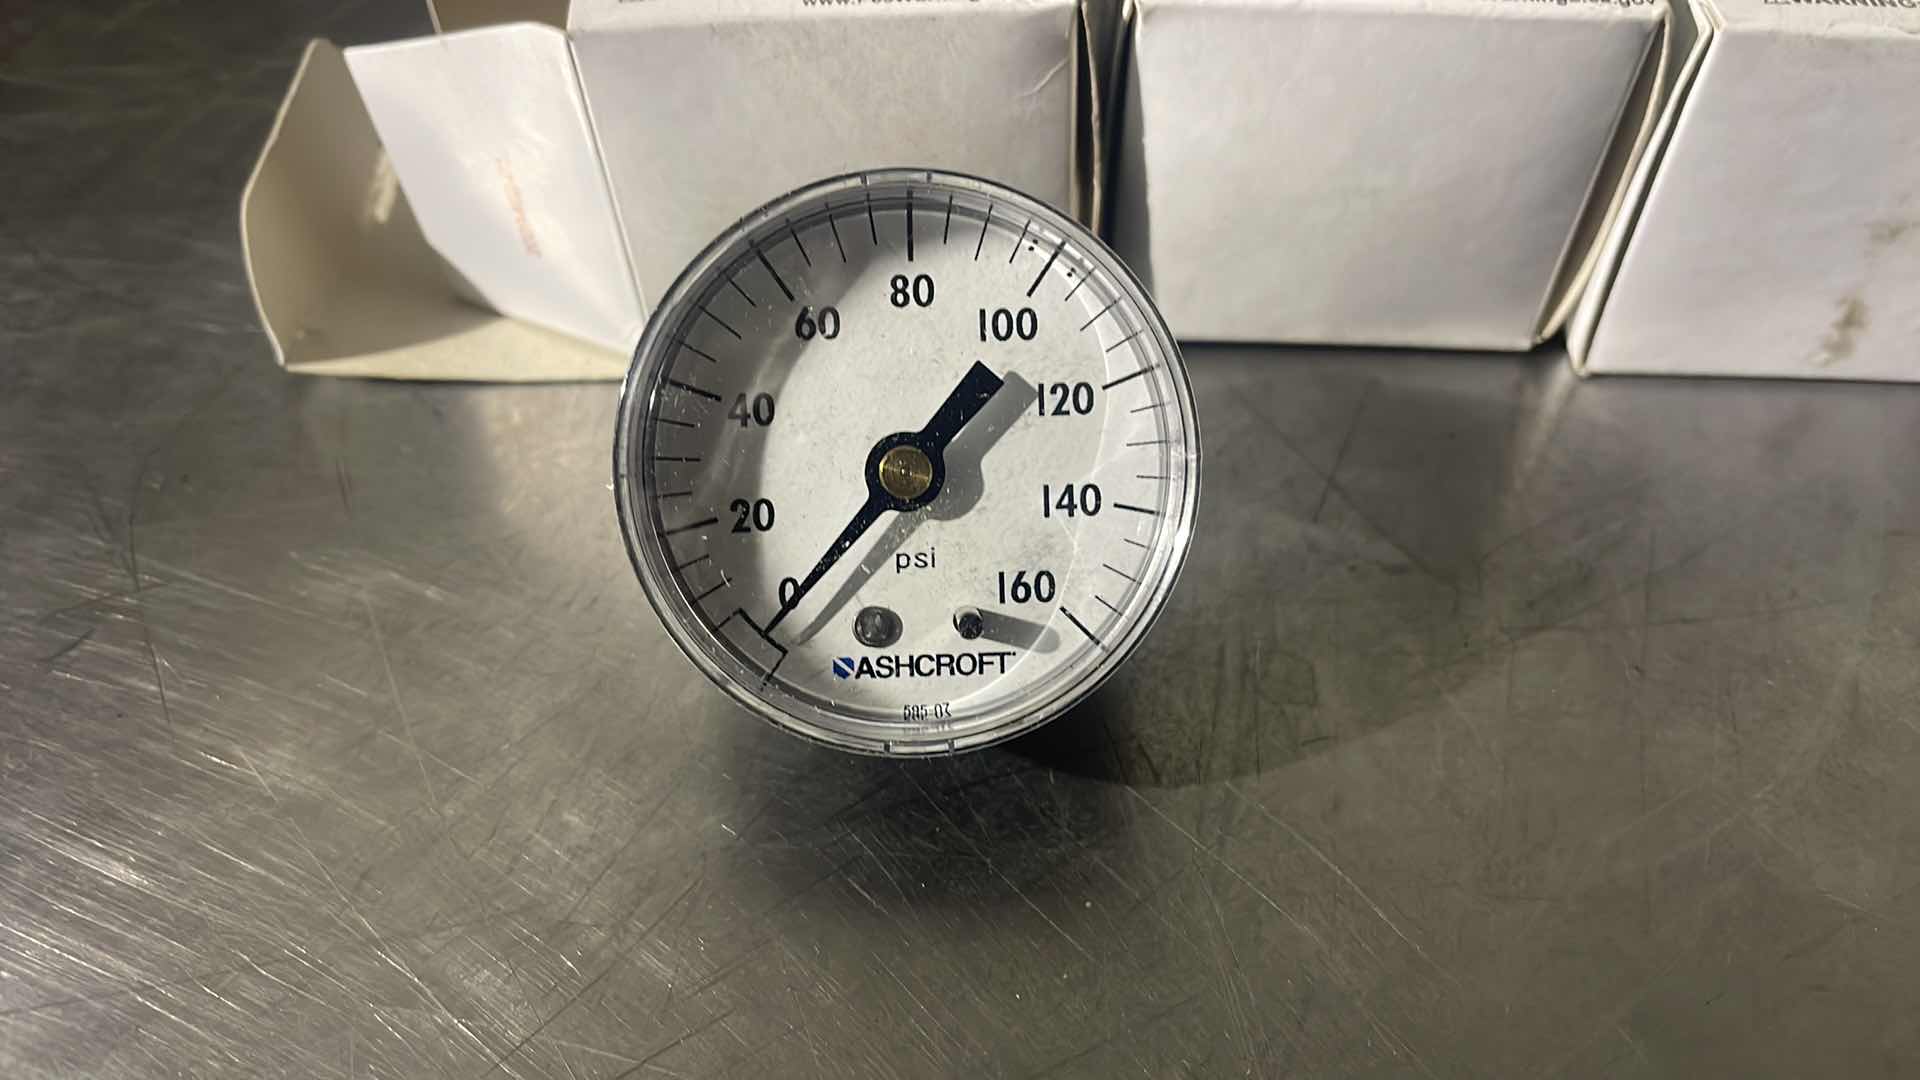 Photo 2 of ASHCROFT 20W-1005PH-02B-160 2INCH DIAL SIZE, DISCONTINUED BY MANUFACTURER, PRESSURE GAUGE, 1/4INCH NPT, CONNECTION TYPE MNPT, 0-160PSI (3)